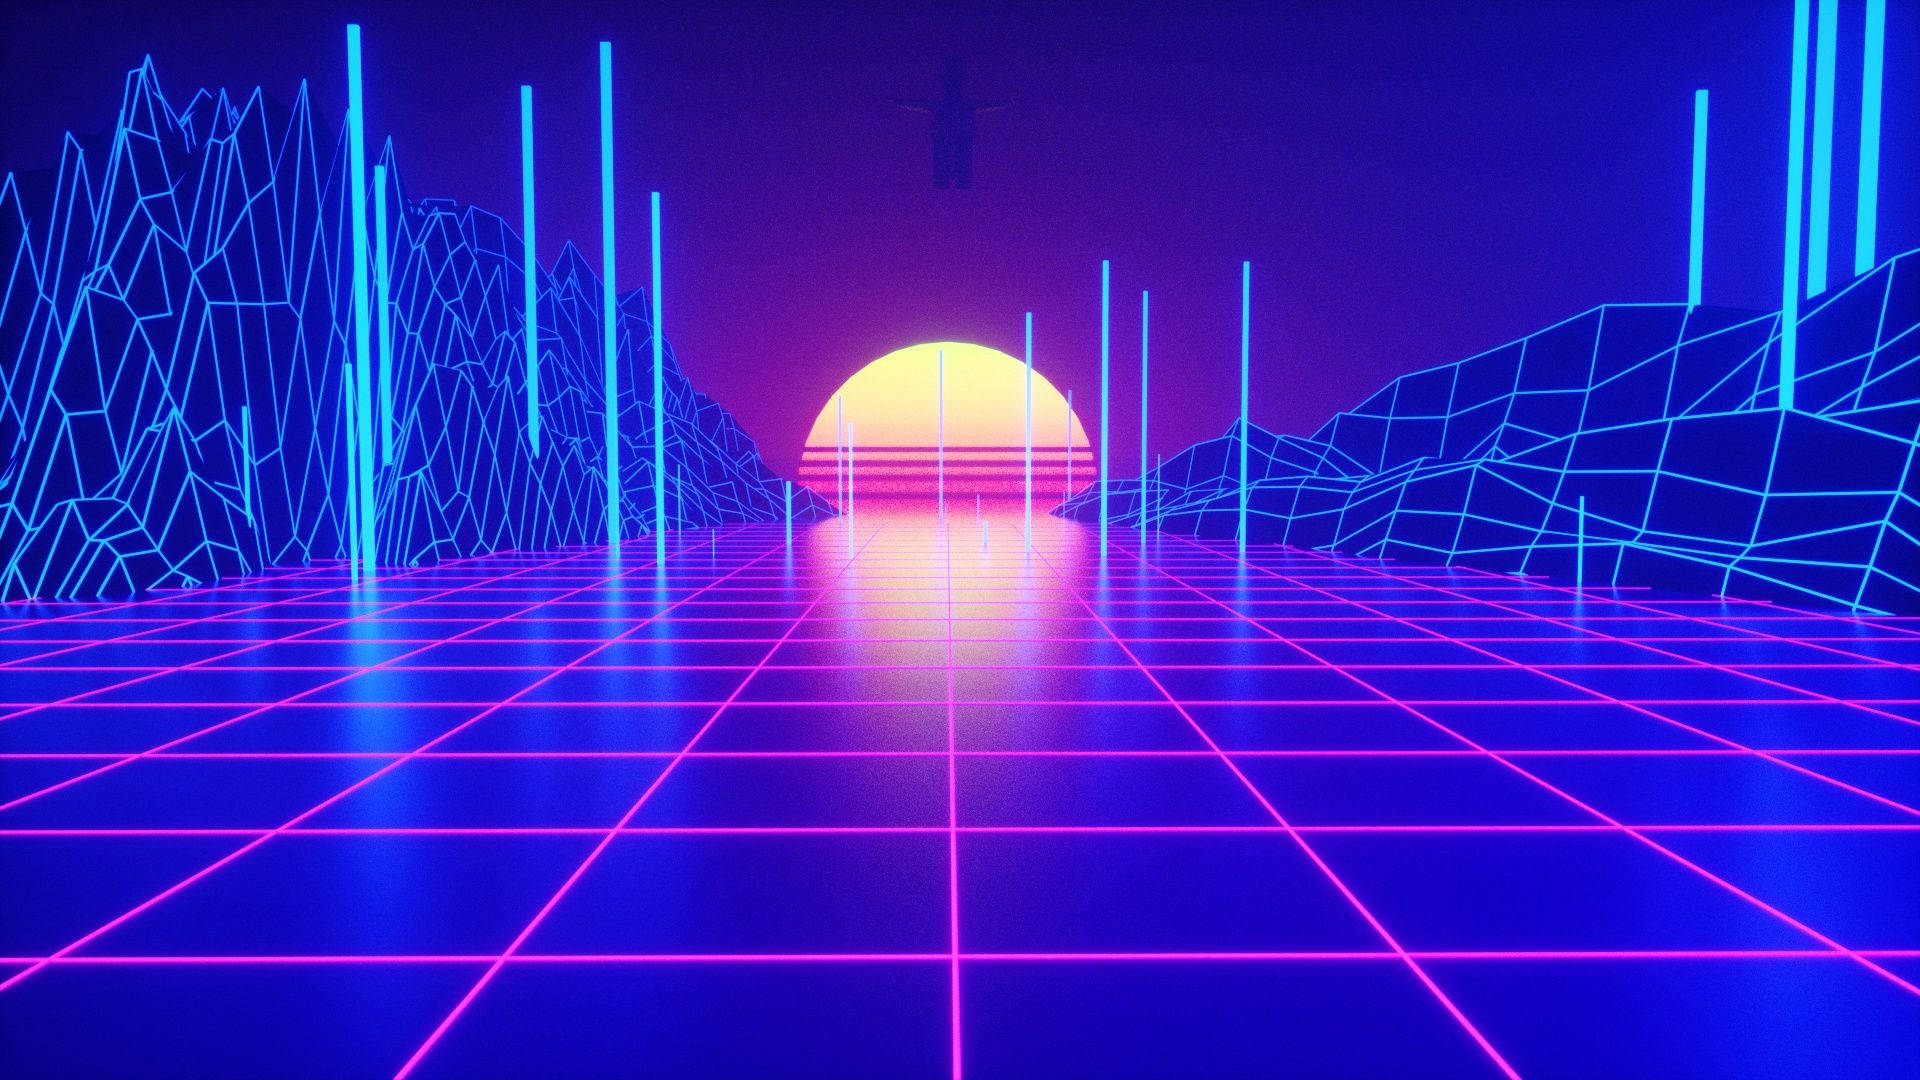 Free Tron Wallpaper Downloads, [100+] Tron Wallpapers for FREE | Wallpapers .com